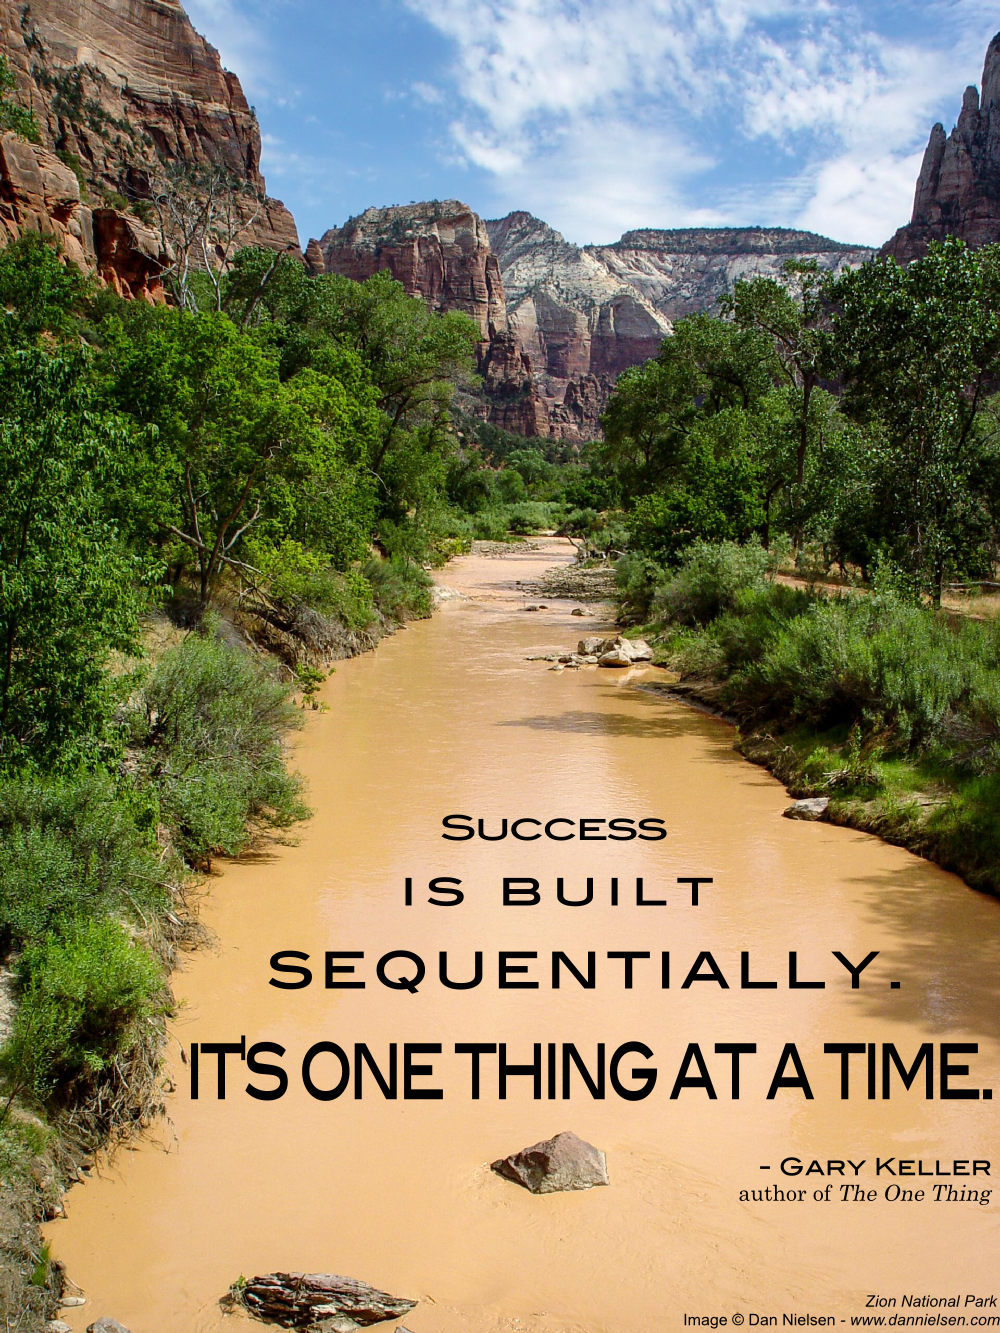 "Success is built sequentially. It's one thing at a time." - Gary Keller